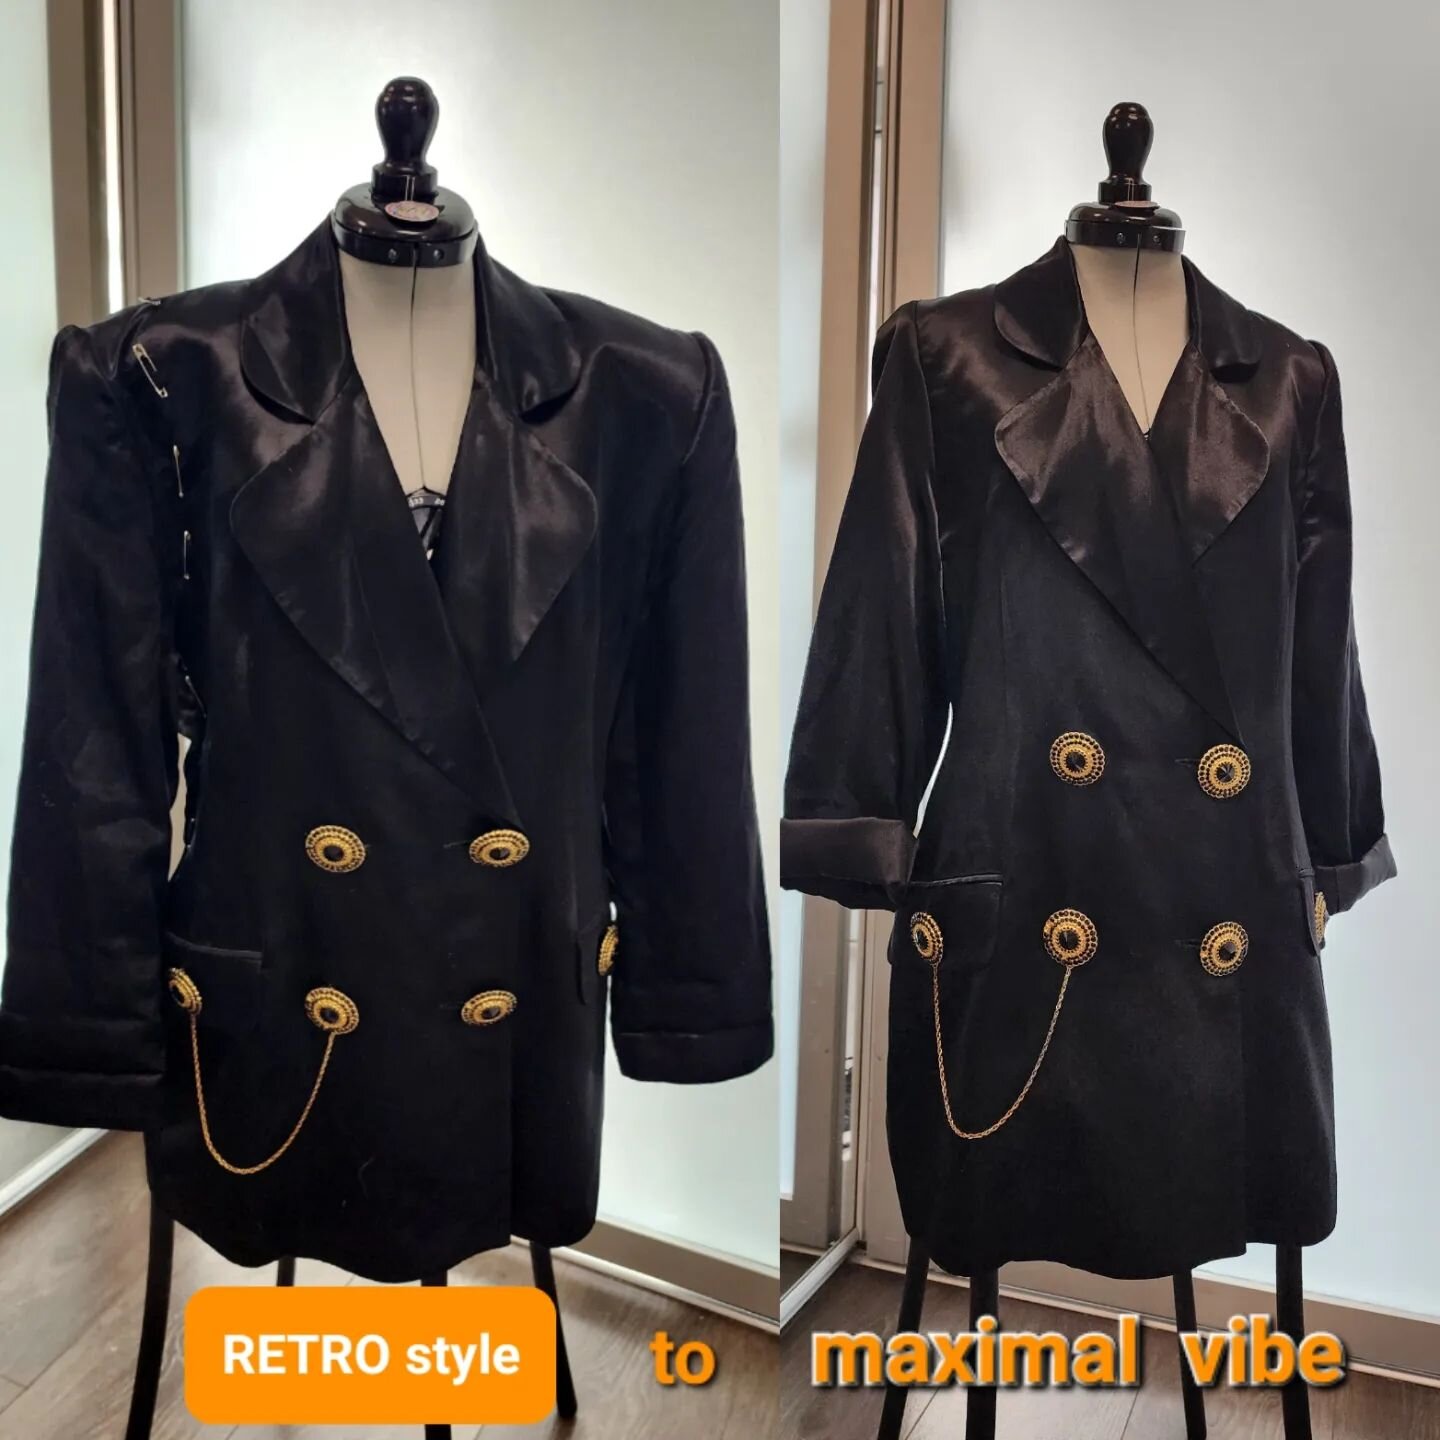 Retro but make it modern maximalism - removing shoulder pads and reducing the shoulders by 5&quot; on this satin blazer, reducing 3.5&quot; from the front hollow of the chest and another 2&quot; from center back. 

It can now be worn as more than a H